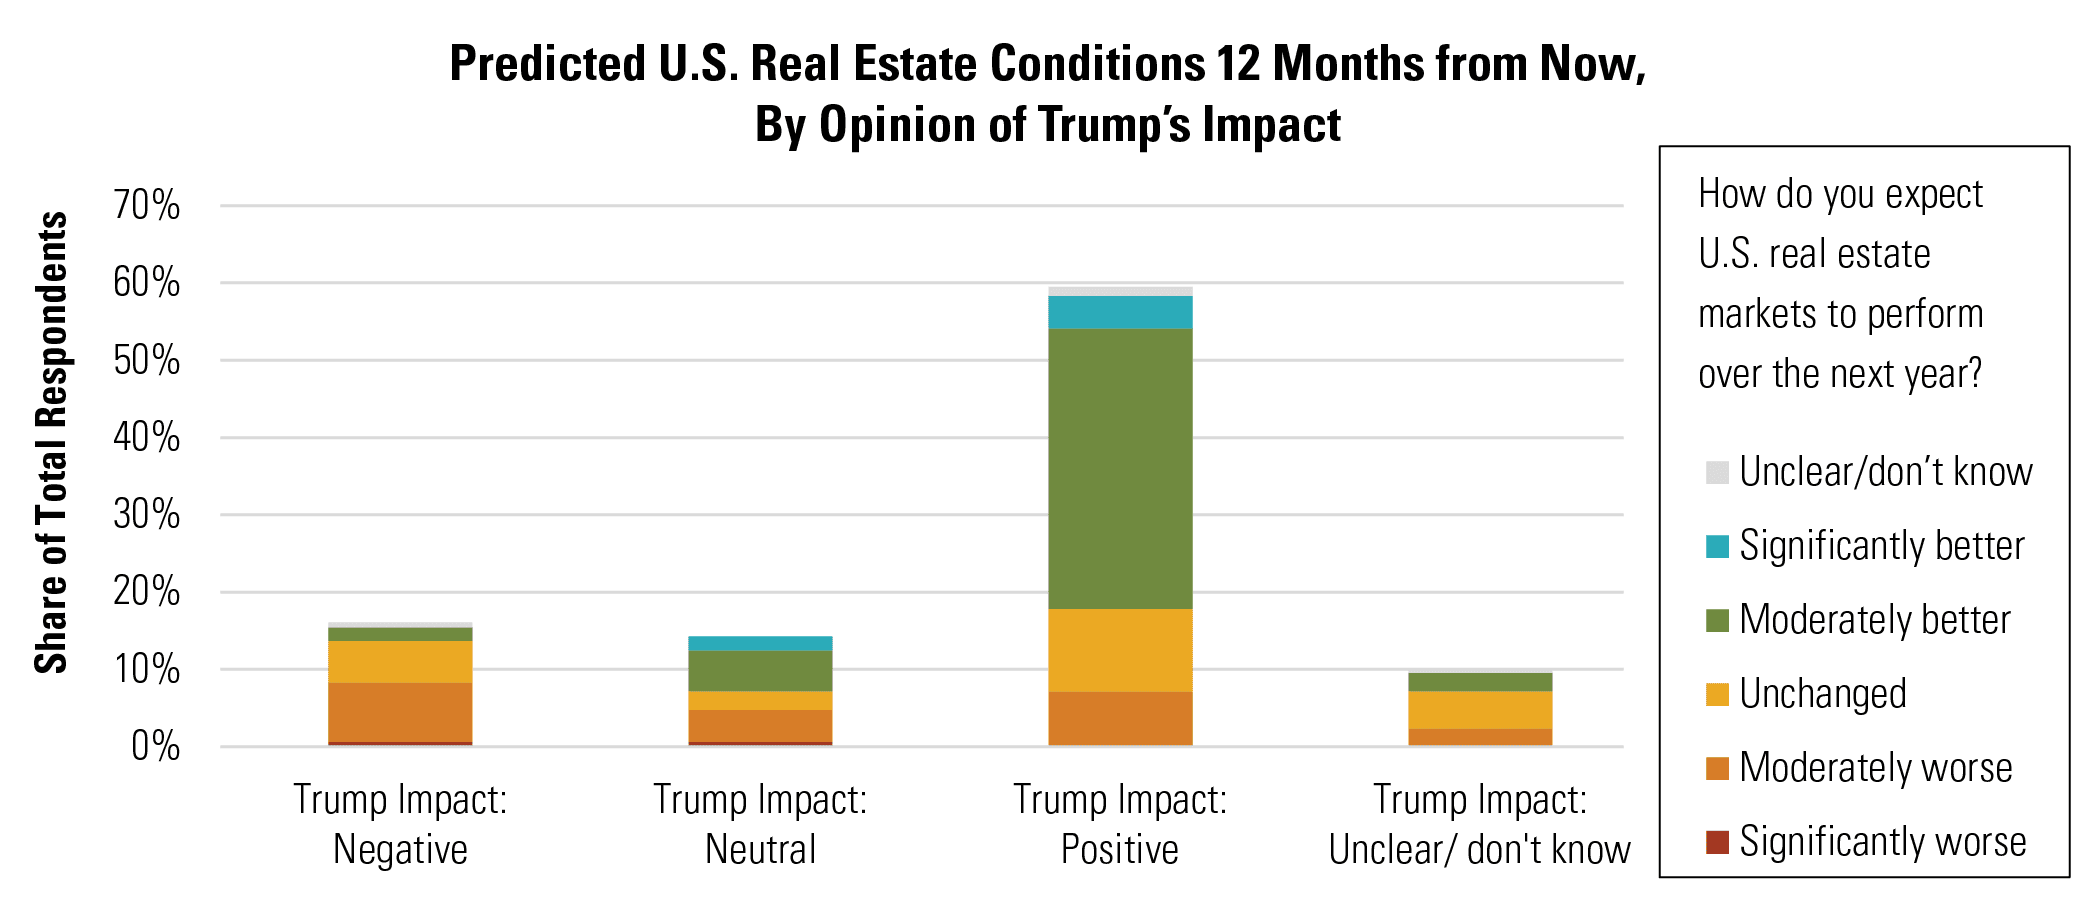 Predicted U.S. Real Estate Conditions 12 Months from Now, By Opinion of Trumpâs Impact